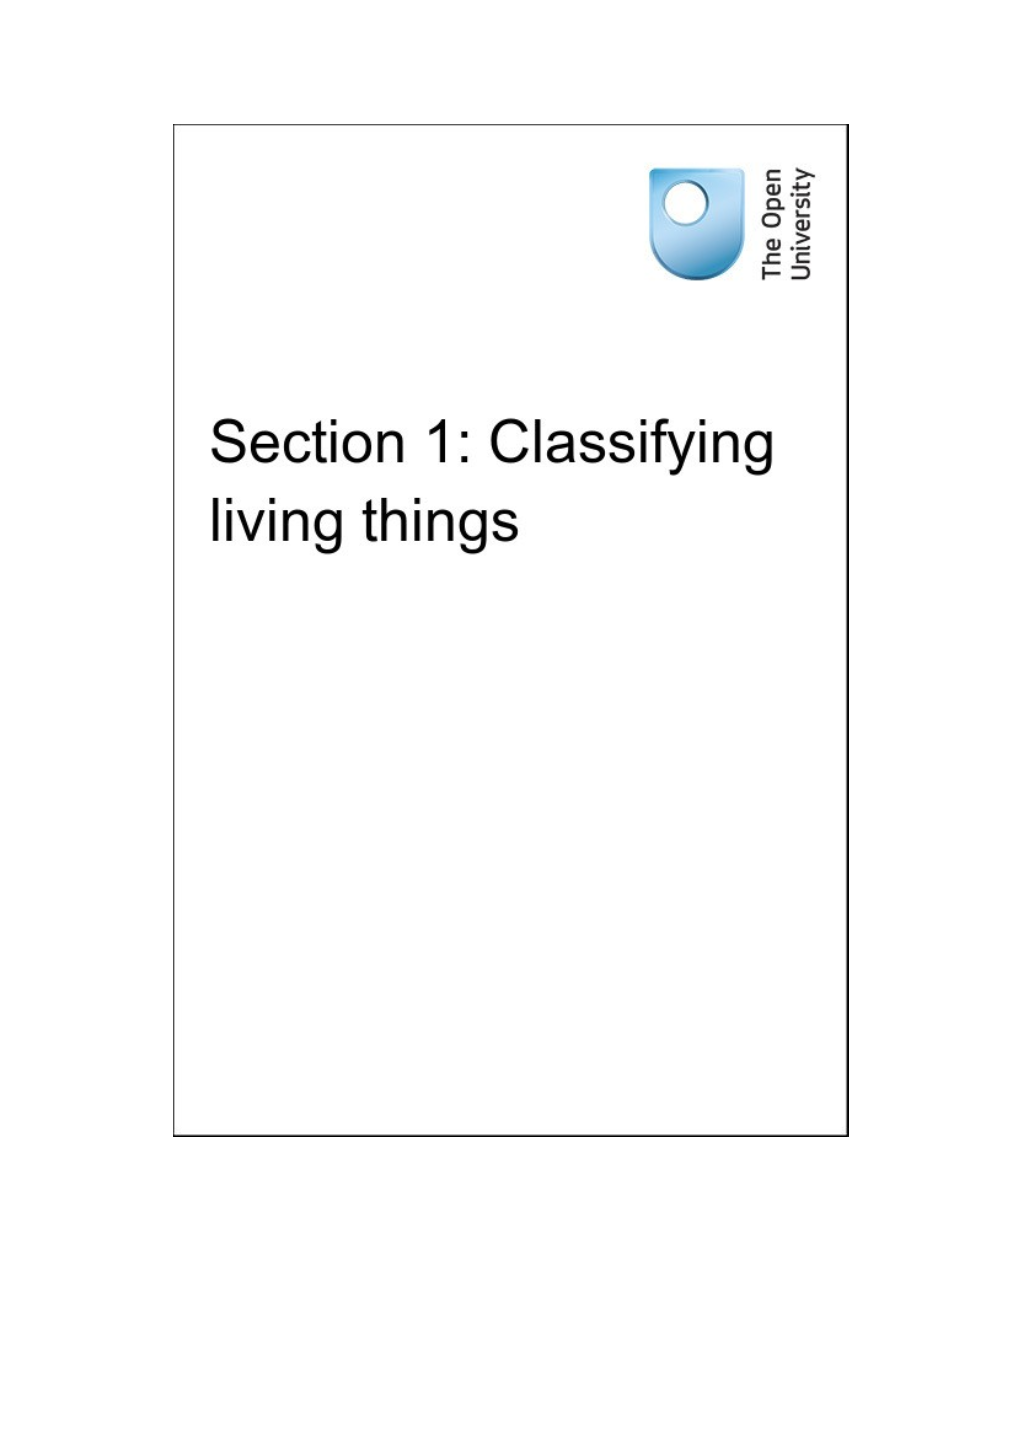 Section 1: Classifying Living Things